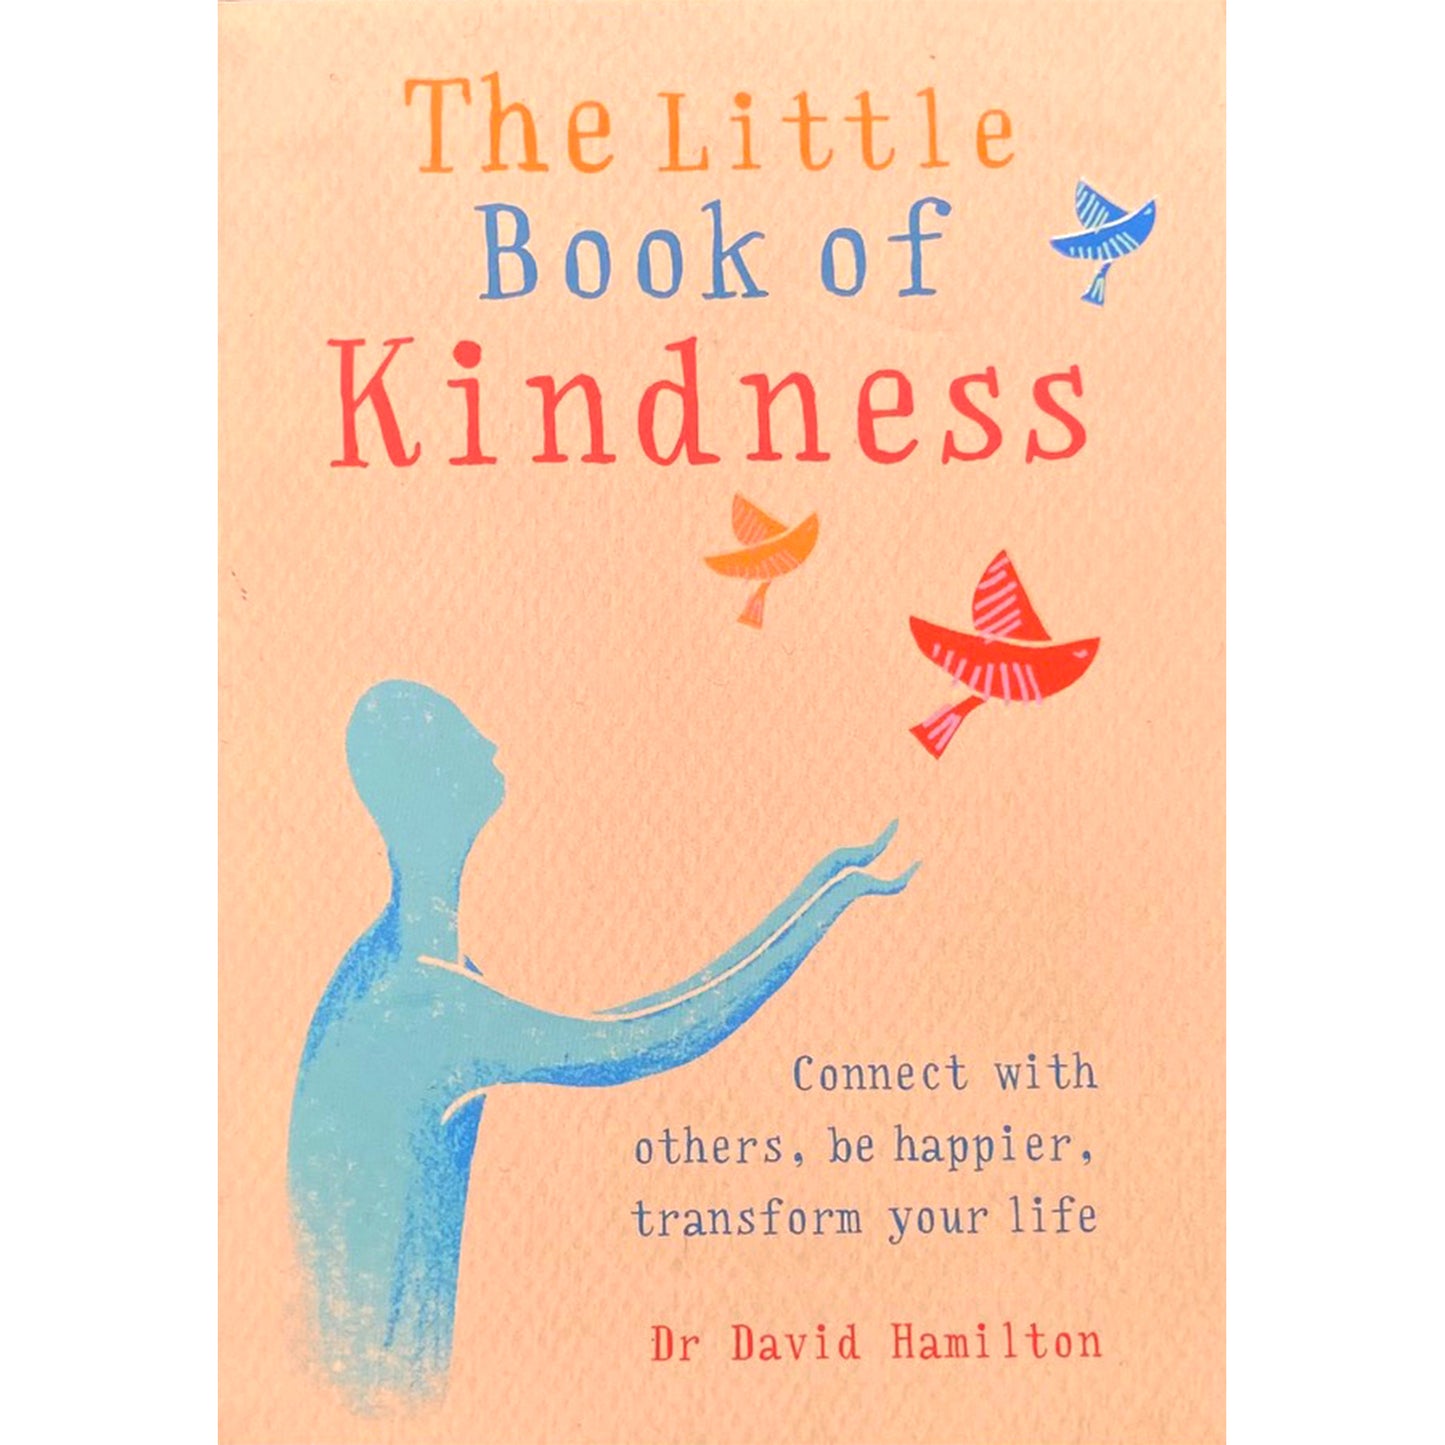 The Little Book of Kindness by Dr David Hamilton